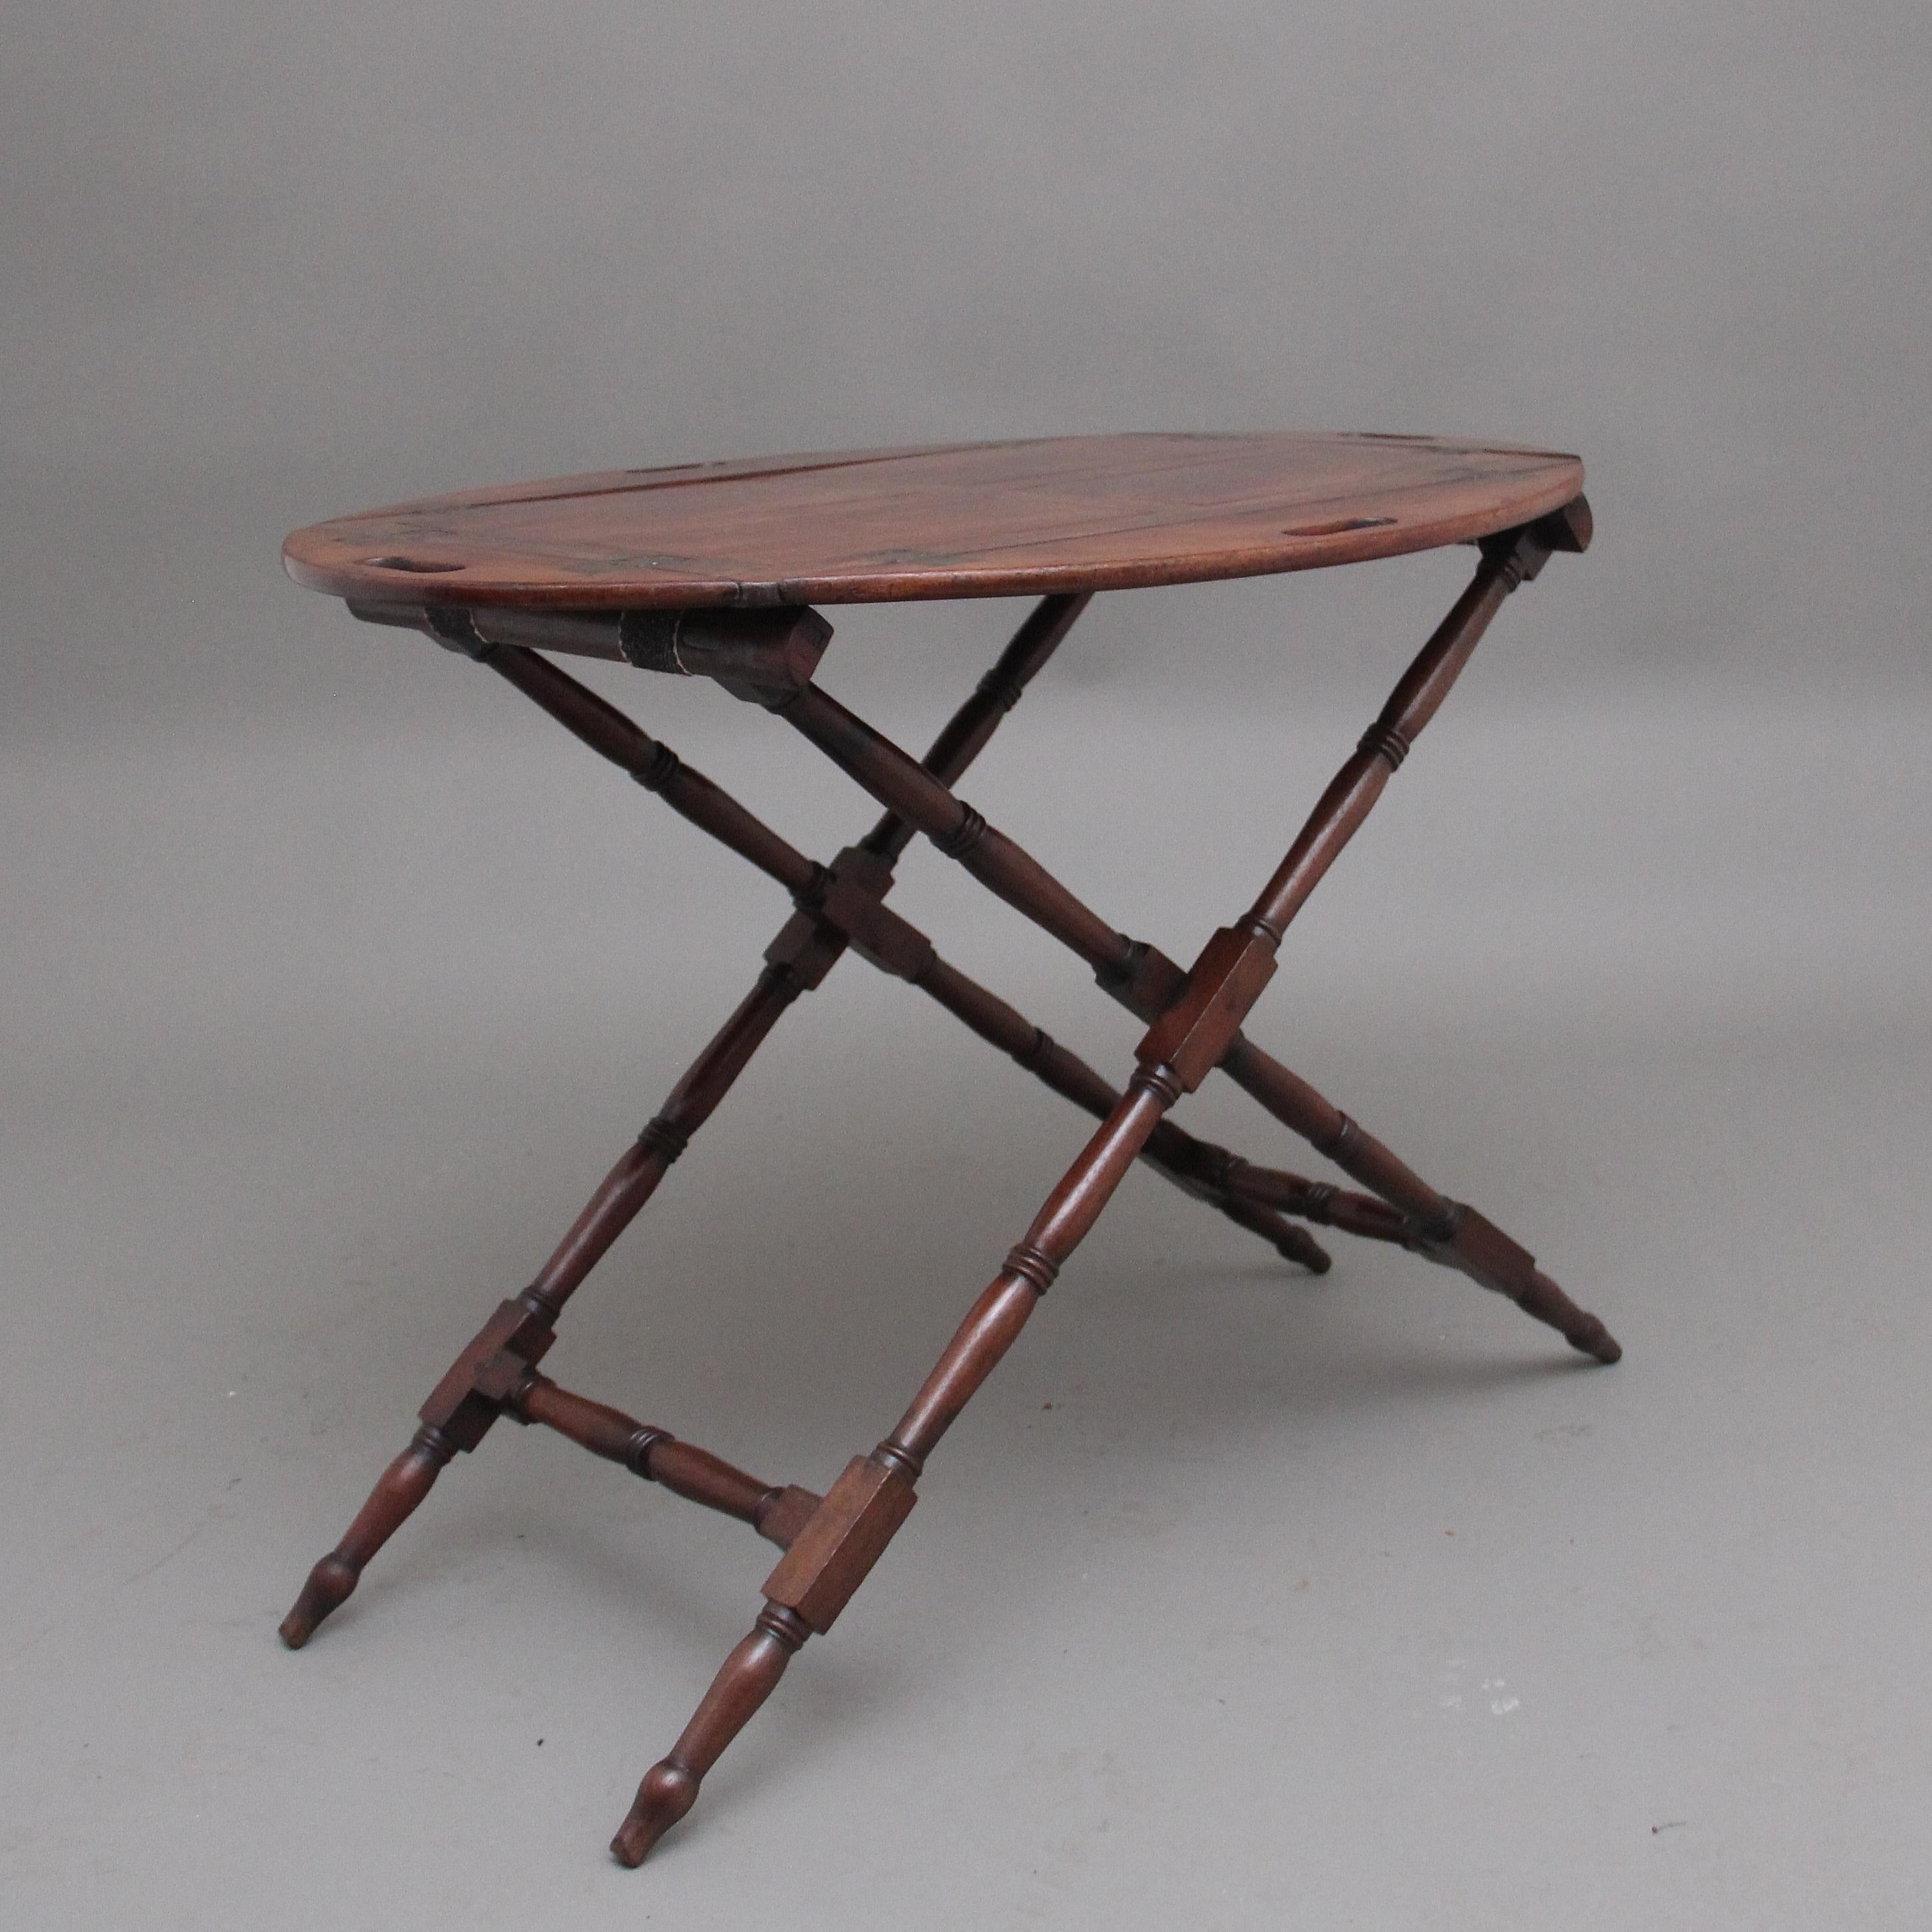 Early 19th Century mahogany folding butlers tray on stand, the rectangular paneled tray has four folding sides with inset brass hinges with each side having fret cut carrying handles, supported on folding stand with decorative turned supports. 